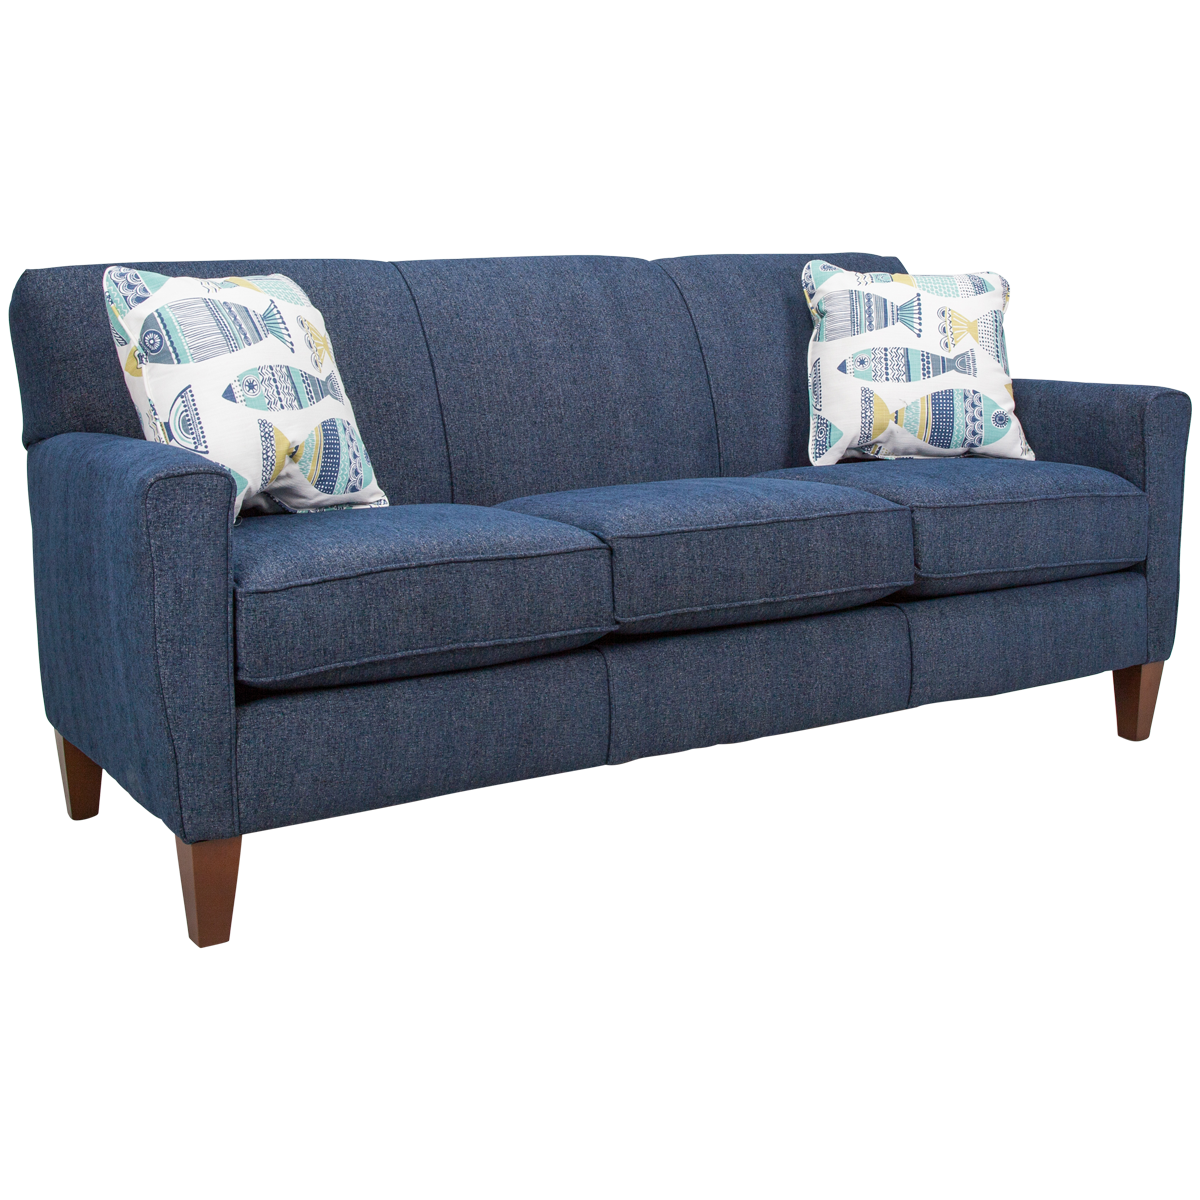 Collegedale Sofa W/frame Coilengland | Babette's Furniture & Home With Navy Linen Coil Sofas (Gallery 19 of 20)